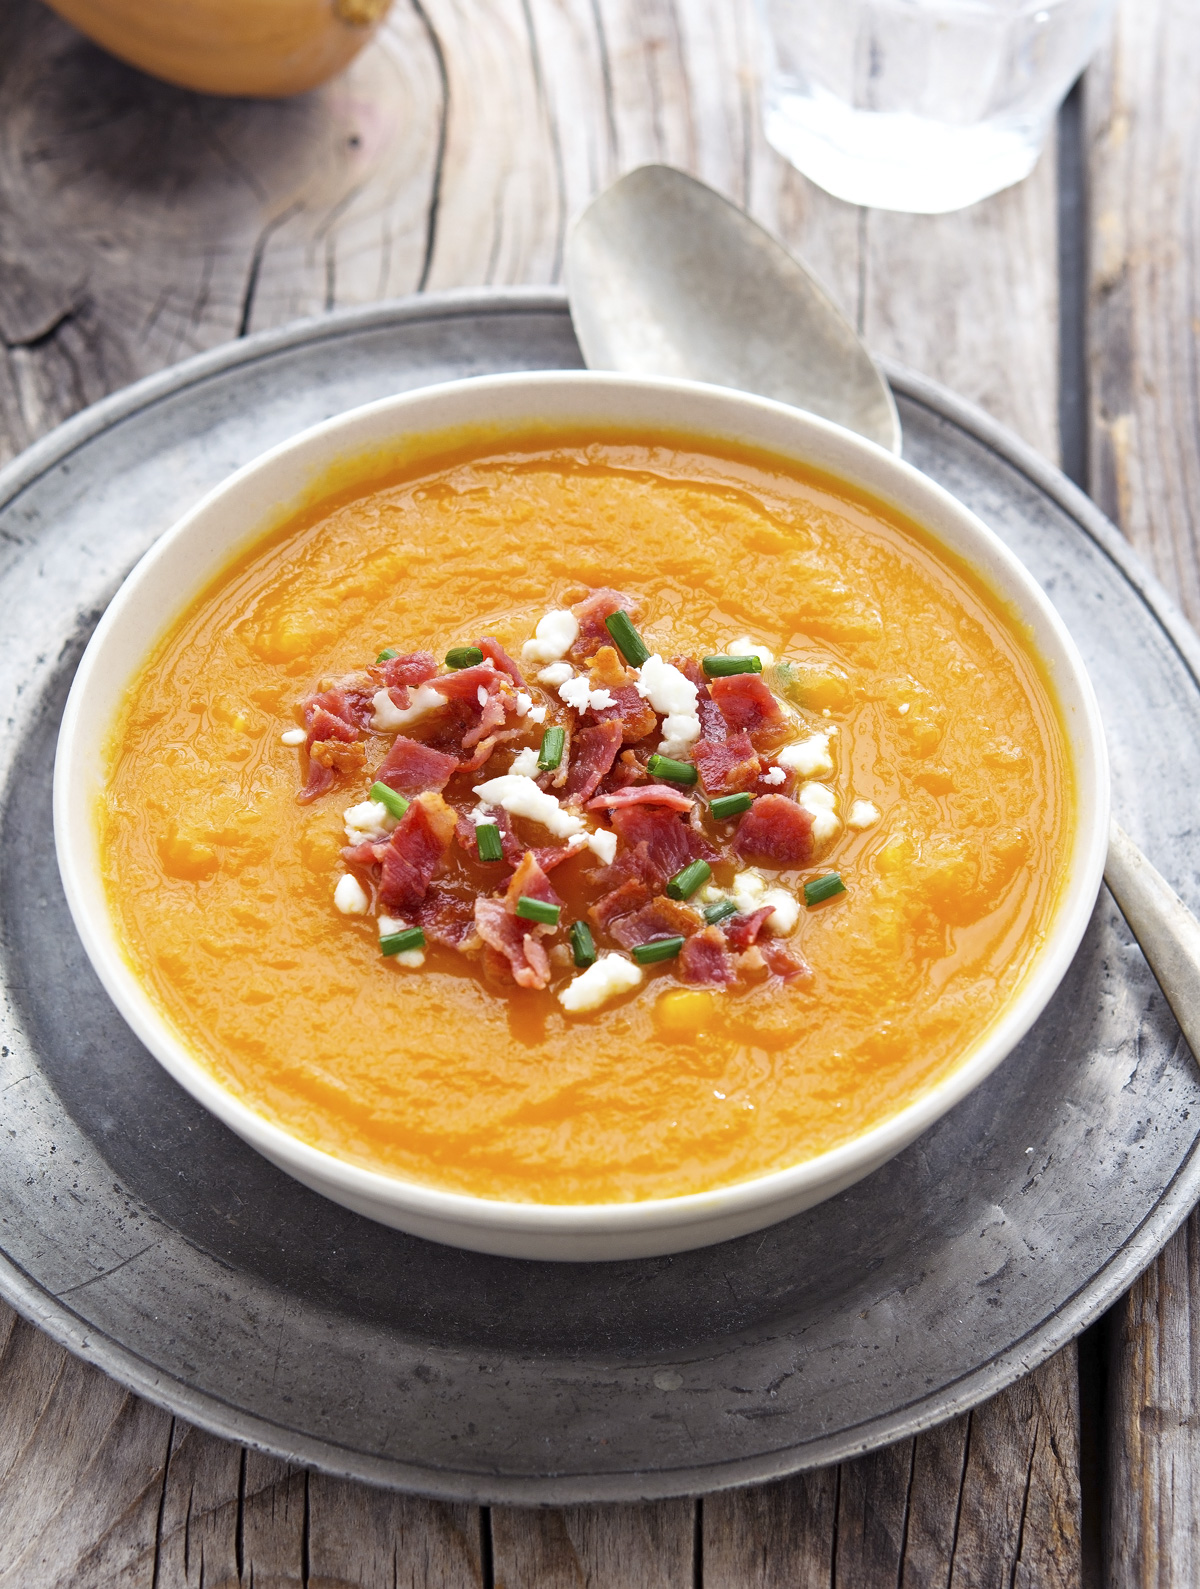 Roasted Butternut Squash and Bacon Soup